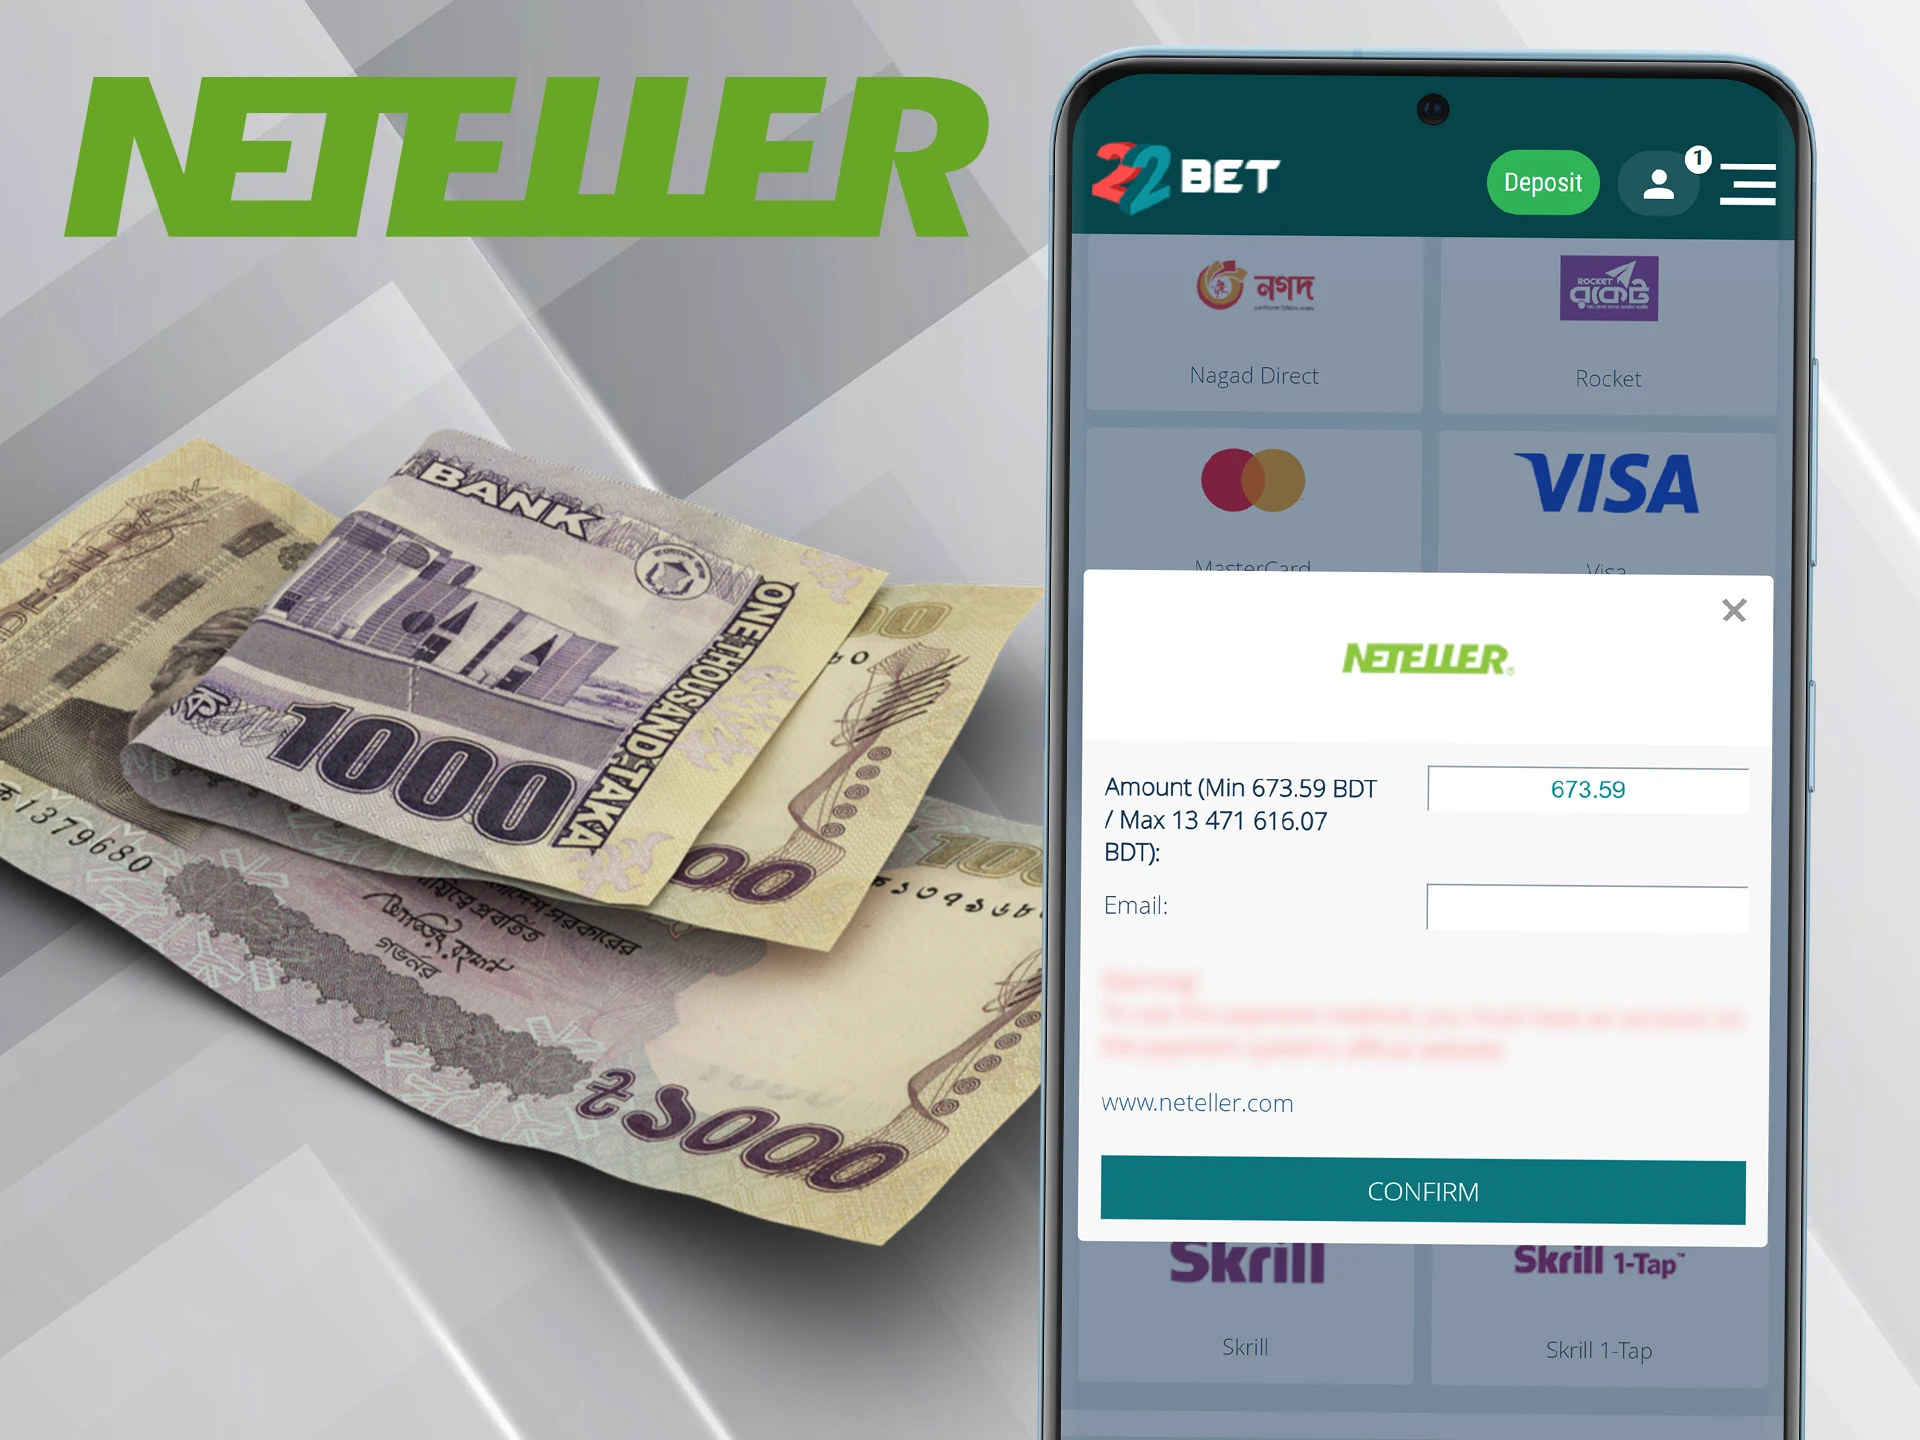 Neteller payment system is available for depositing on bookmakers' websites.